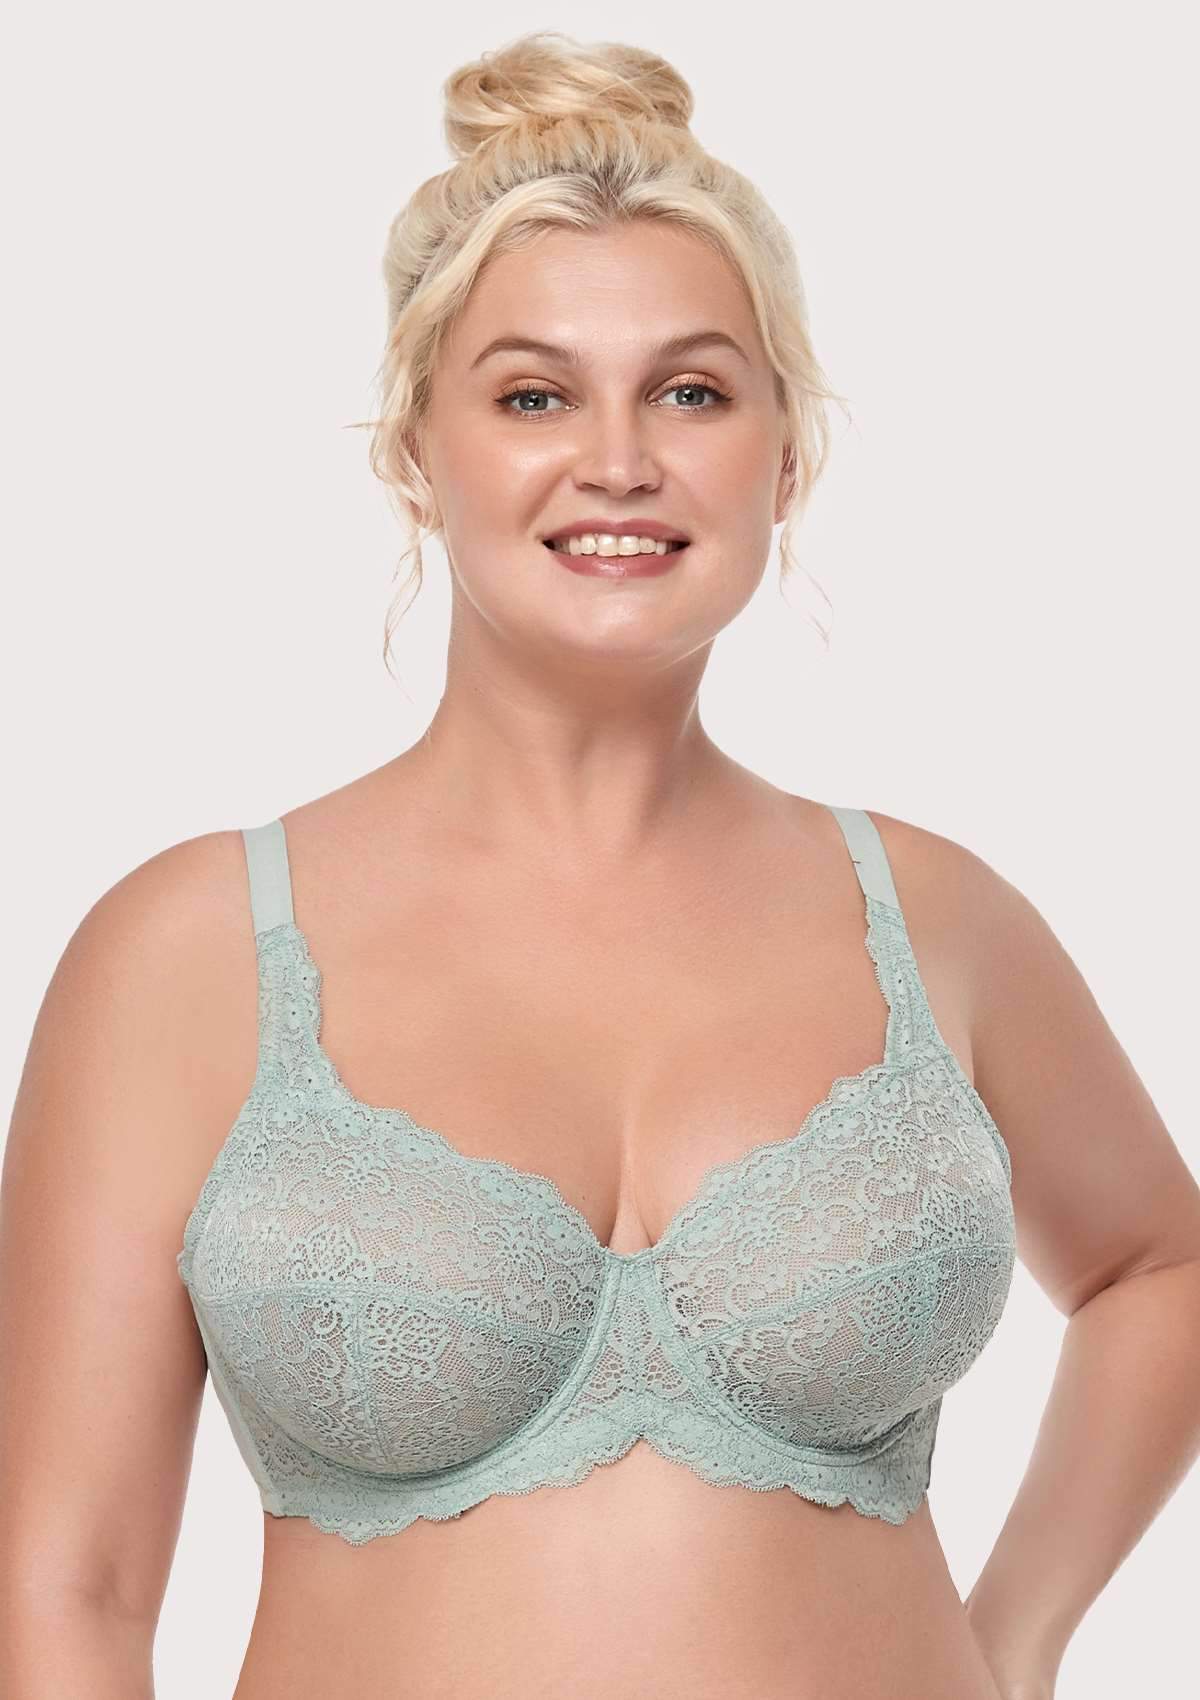 HSIA All-Over Floral Lace: Best Bra For Elderly With Sagging Breasts - Crystal Blue / 42 / DDD/F